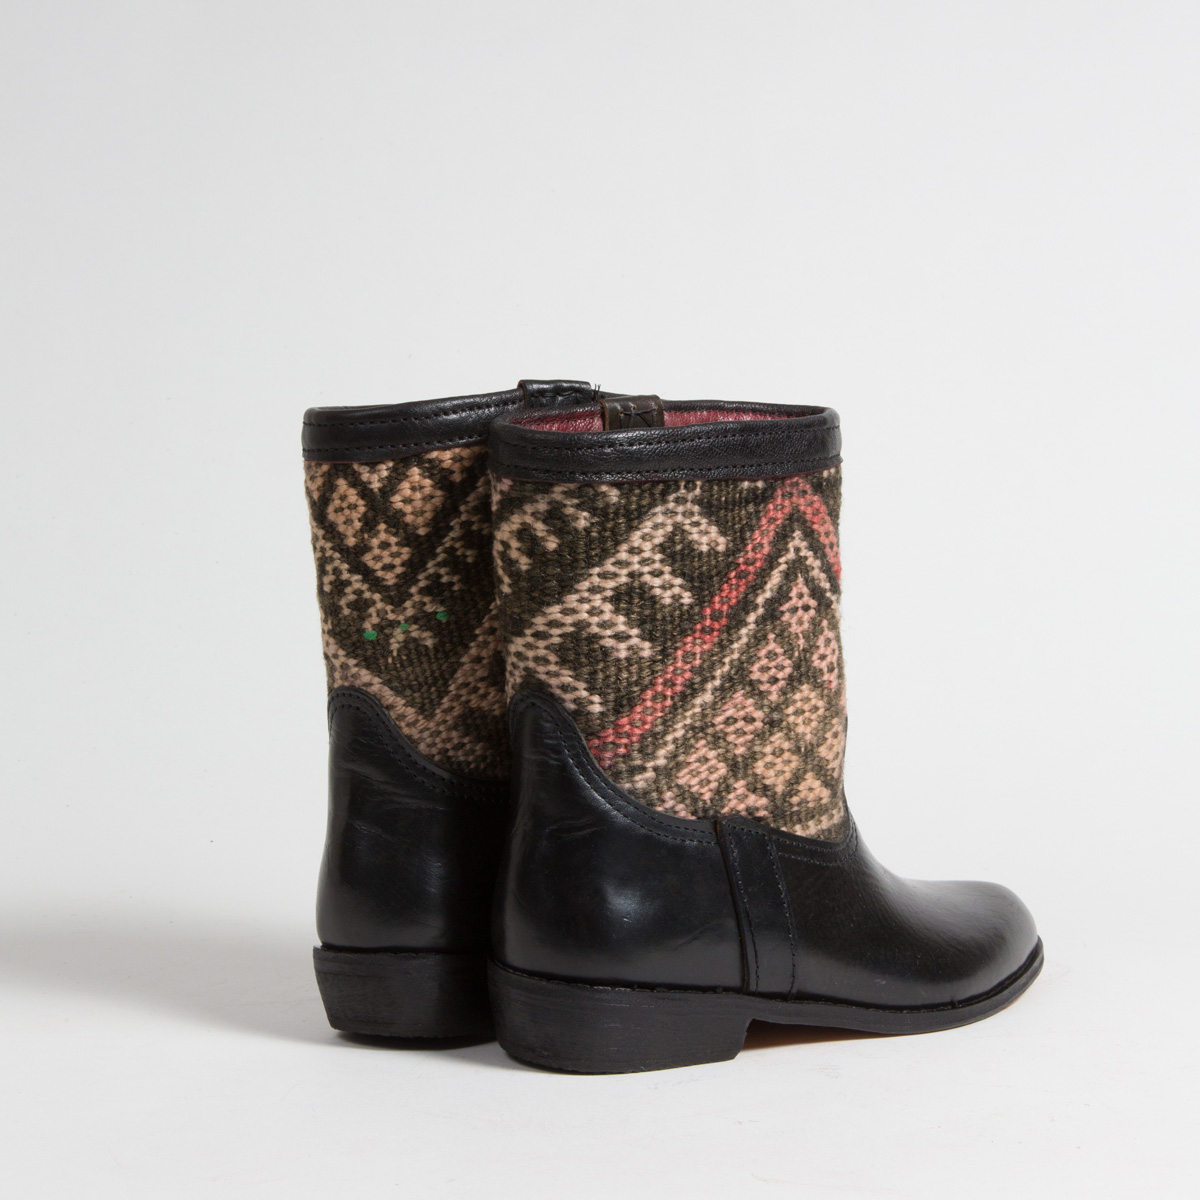 Bottines Kilim cuir mababouche artisanales (Réf. RPN3-37)